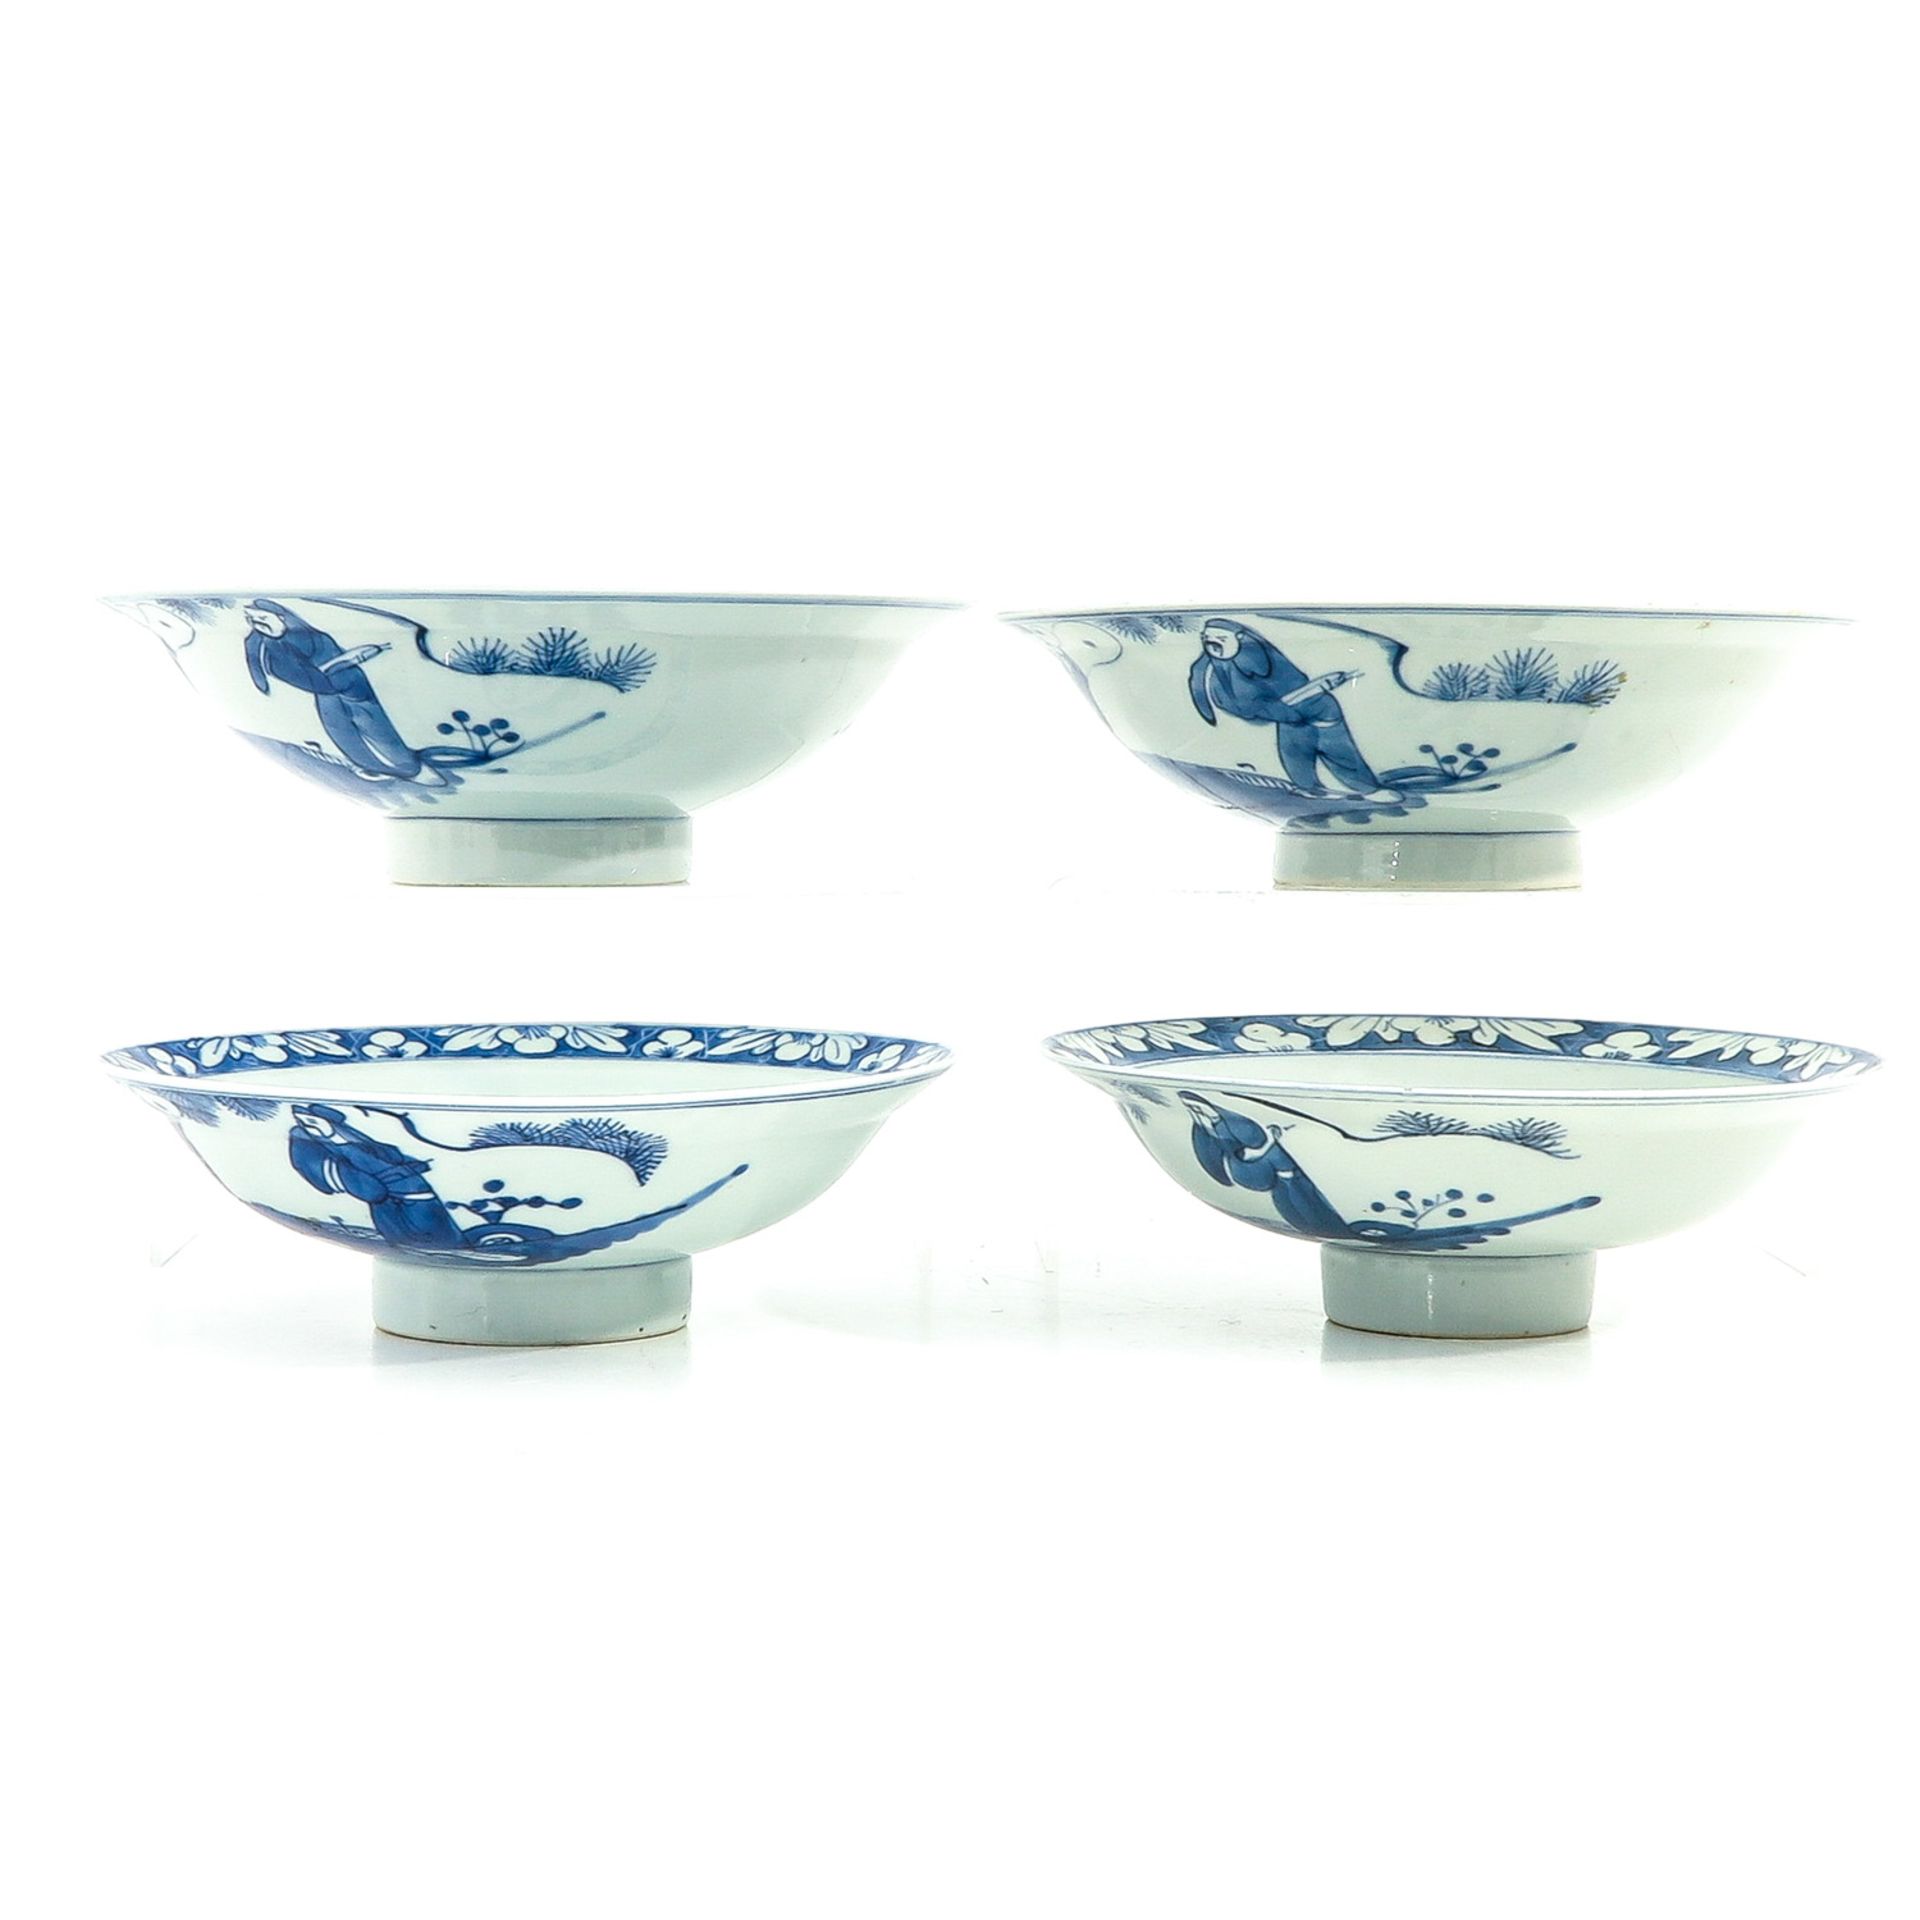 A Series of 4 Blue and White Bowls - Image 2 of 10